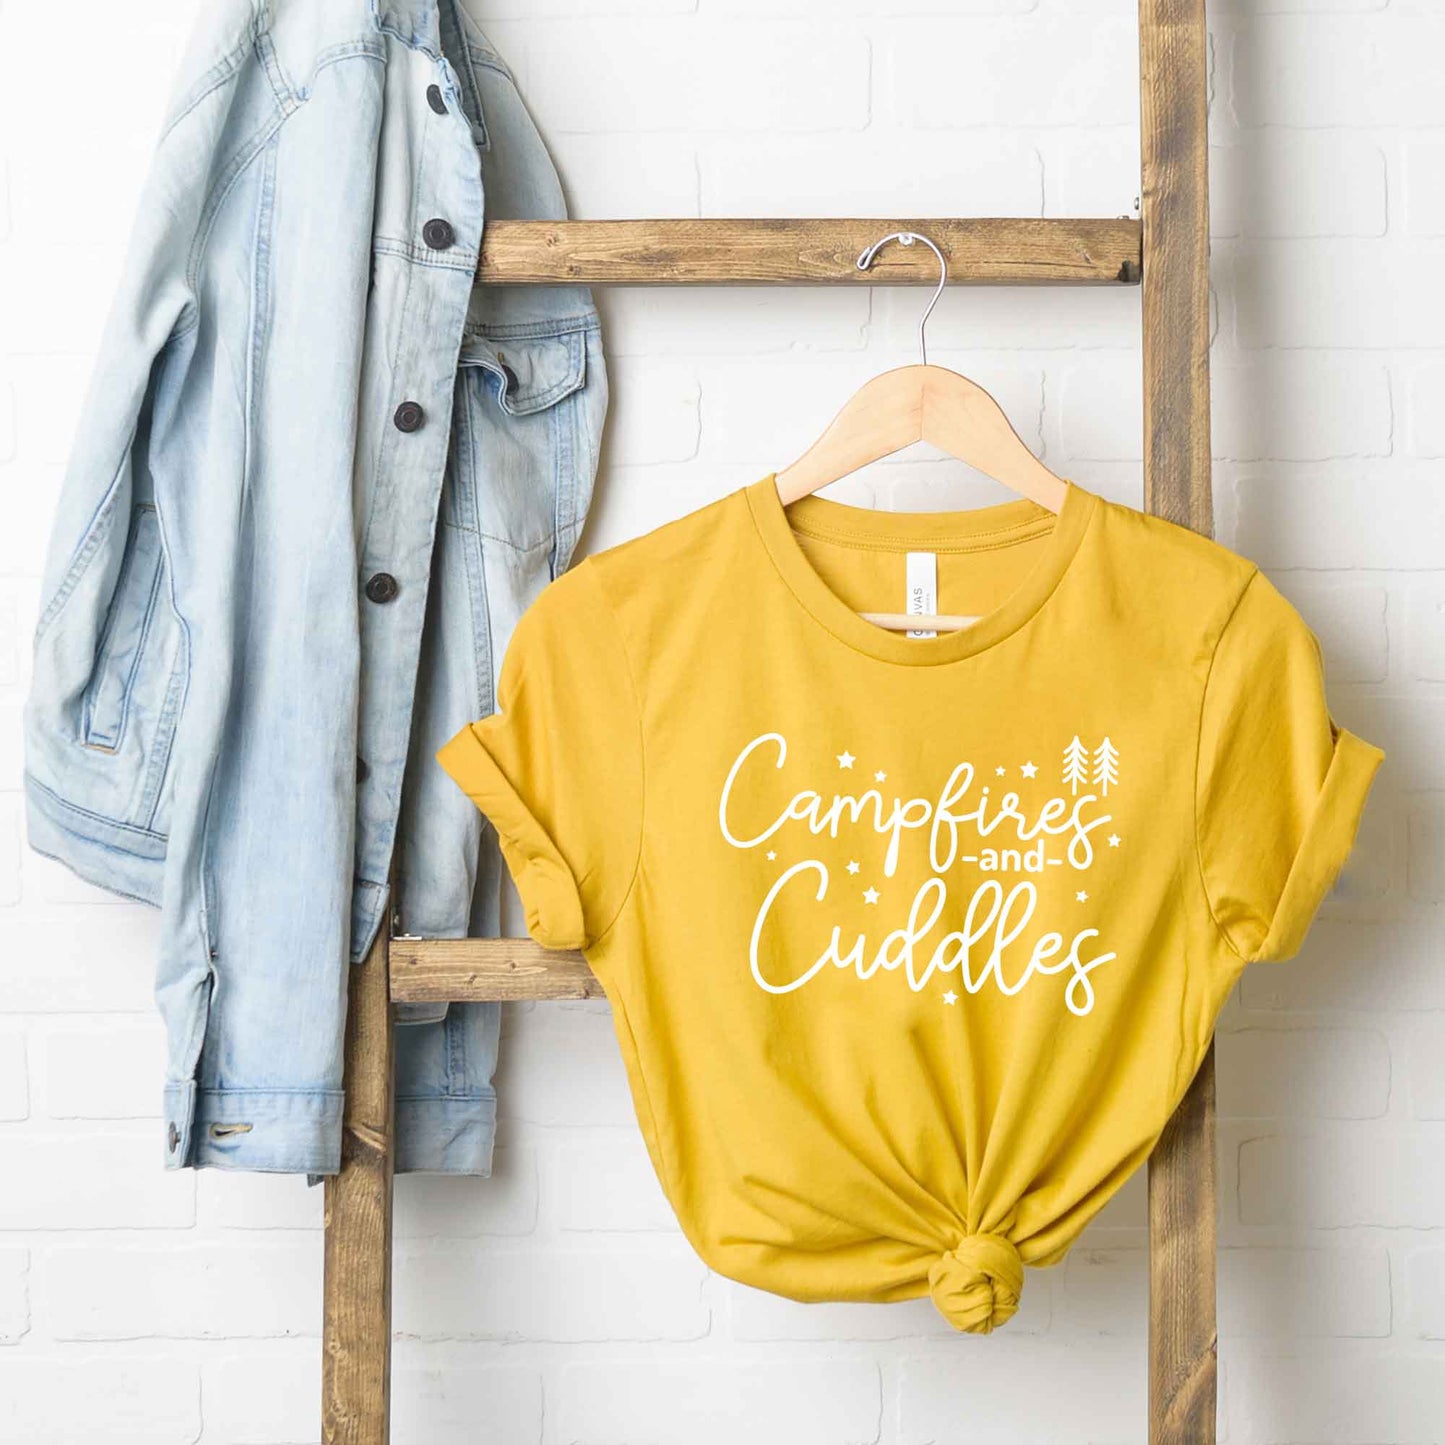 Campfire And Cuddles | Short Sleeve Crew Neck